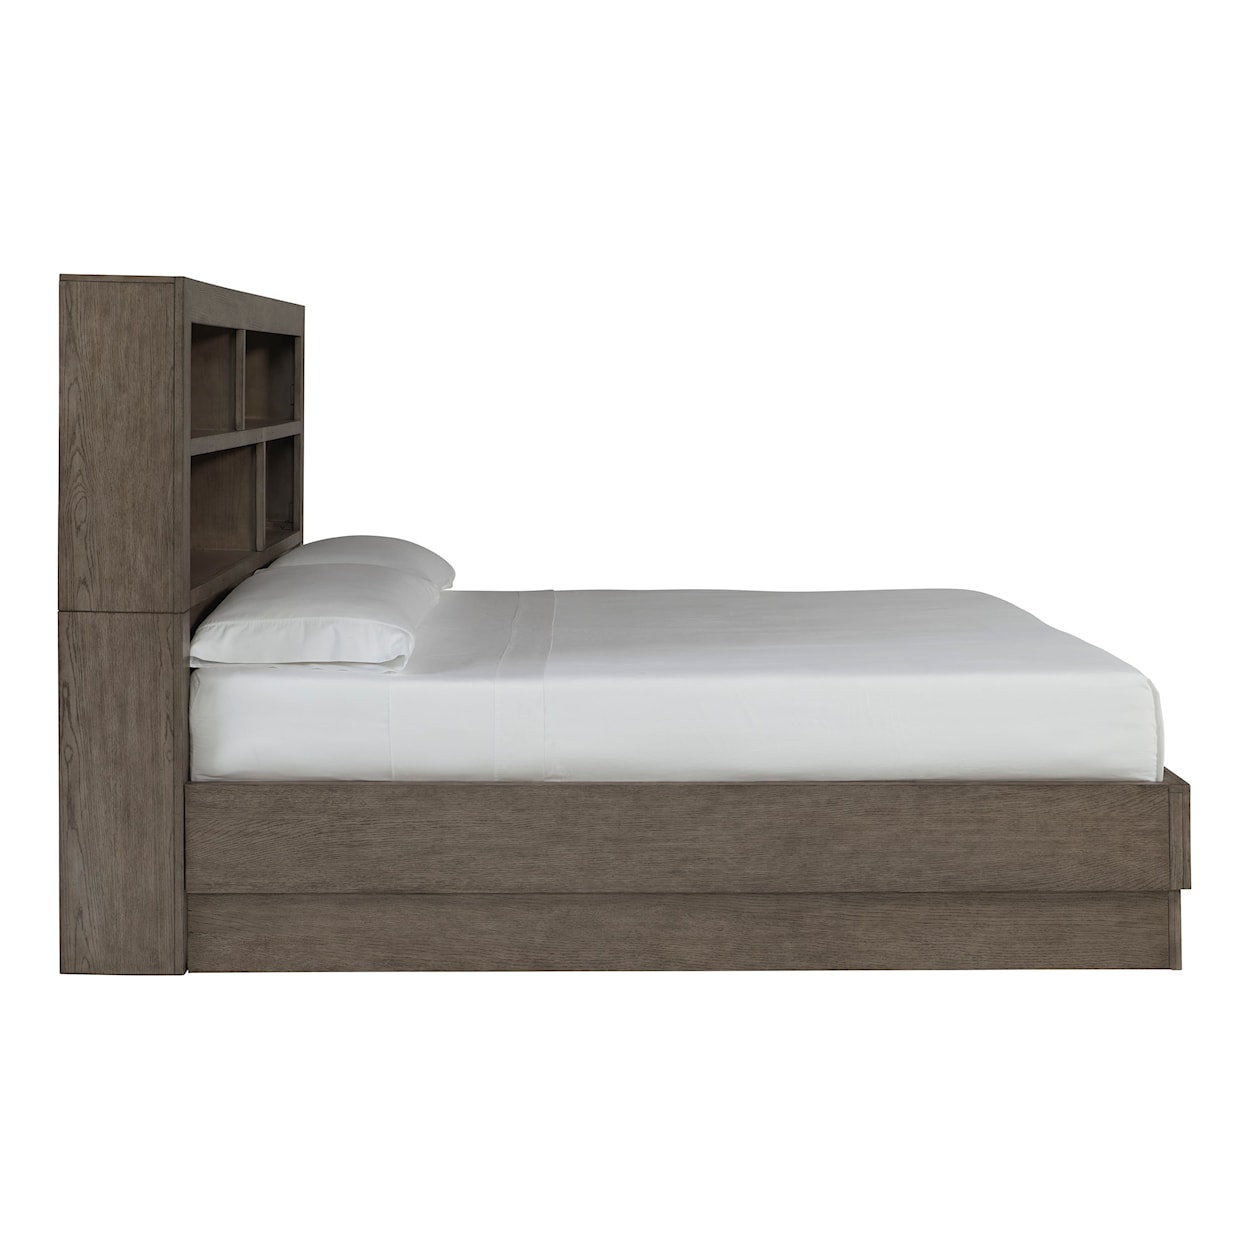 Benchcraft Anibecca Queen Bookcase Bed